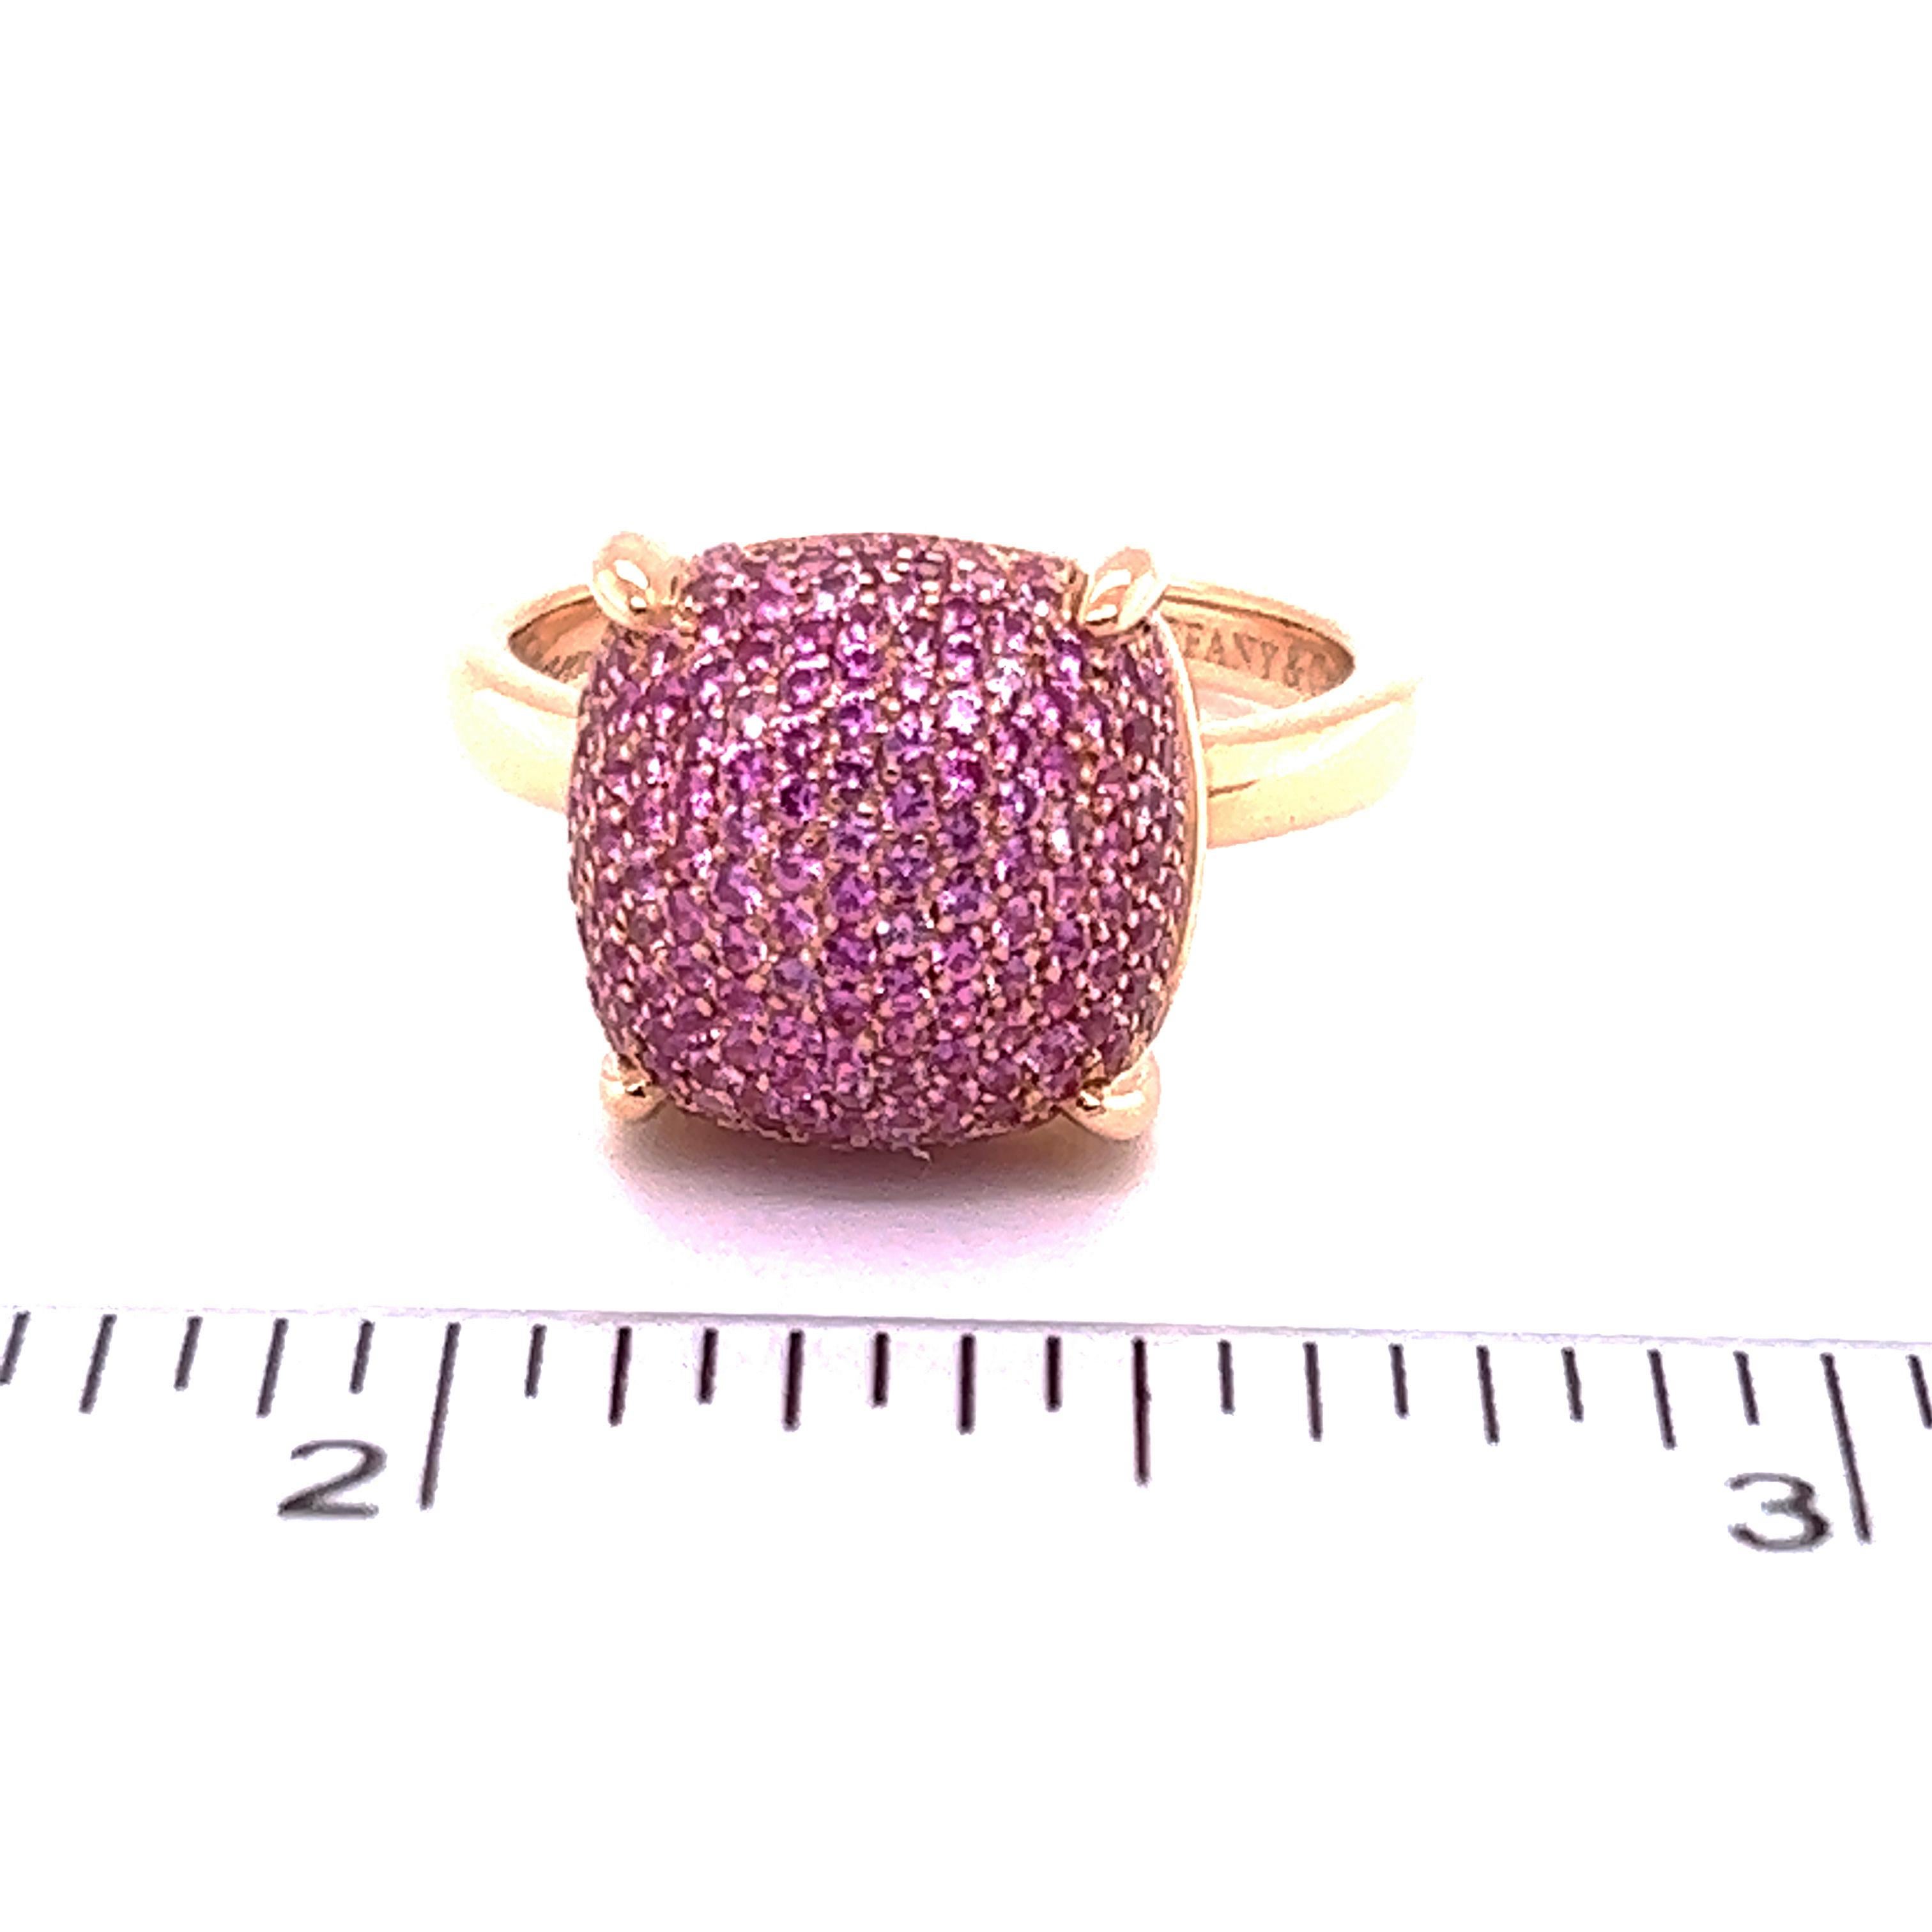 Tiffany & Co. Picasso Sugar Stacks Pink Sapphires 18k Rose Gold Ring 1